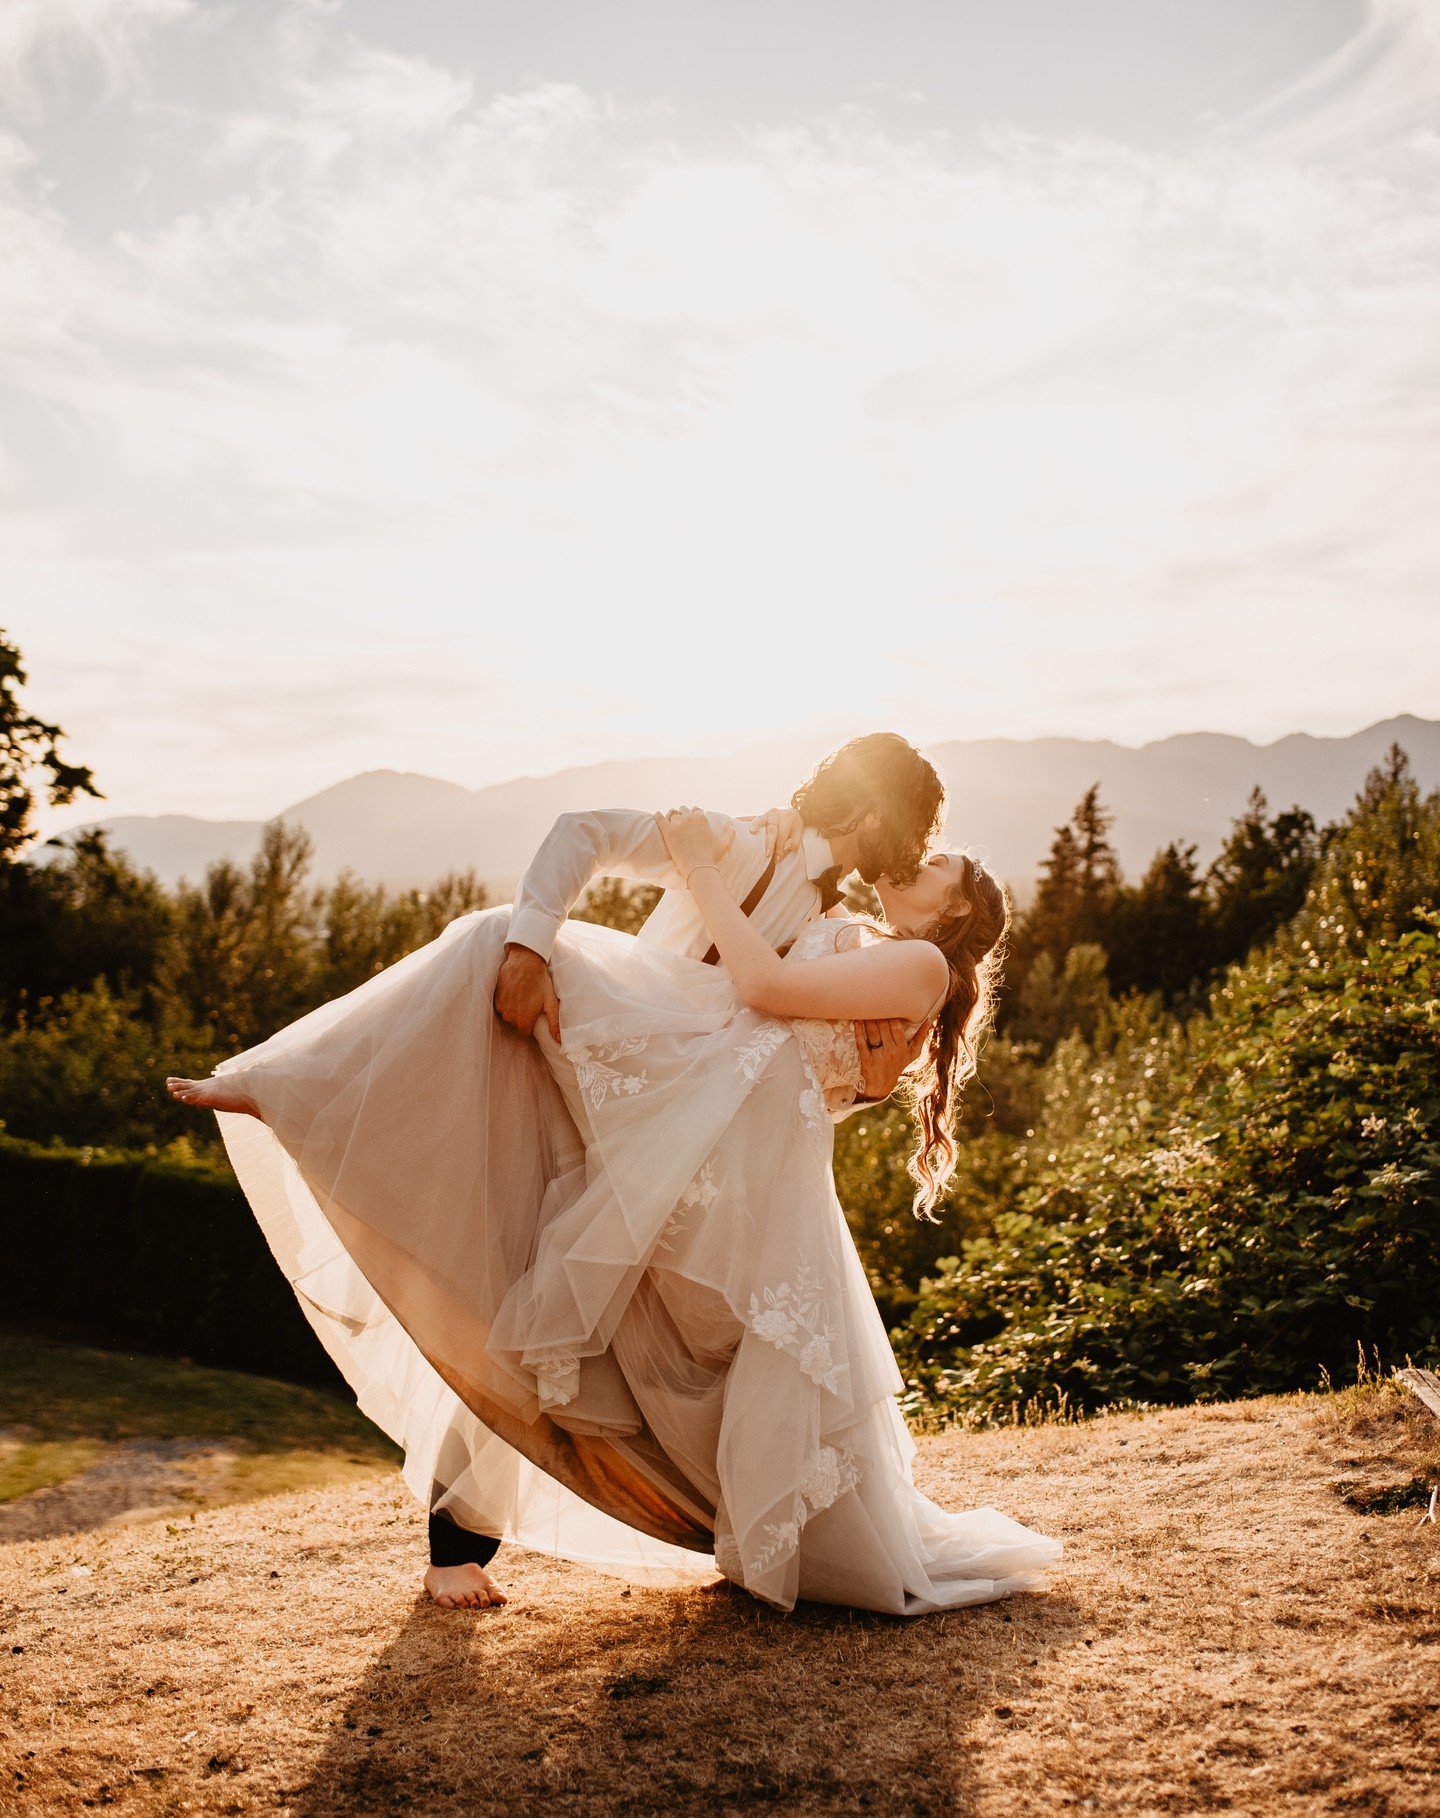 You won't regret taking a few moments from your reception to capture some ✨ golden hour magic ✨